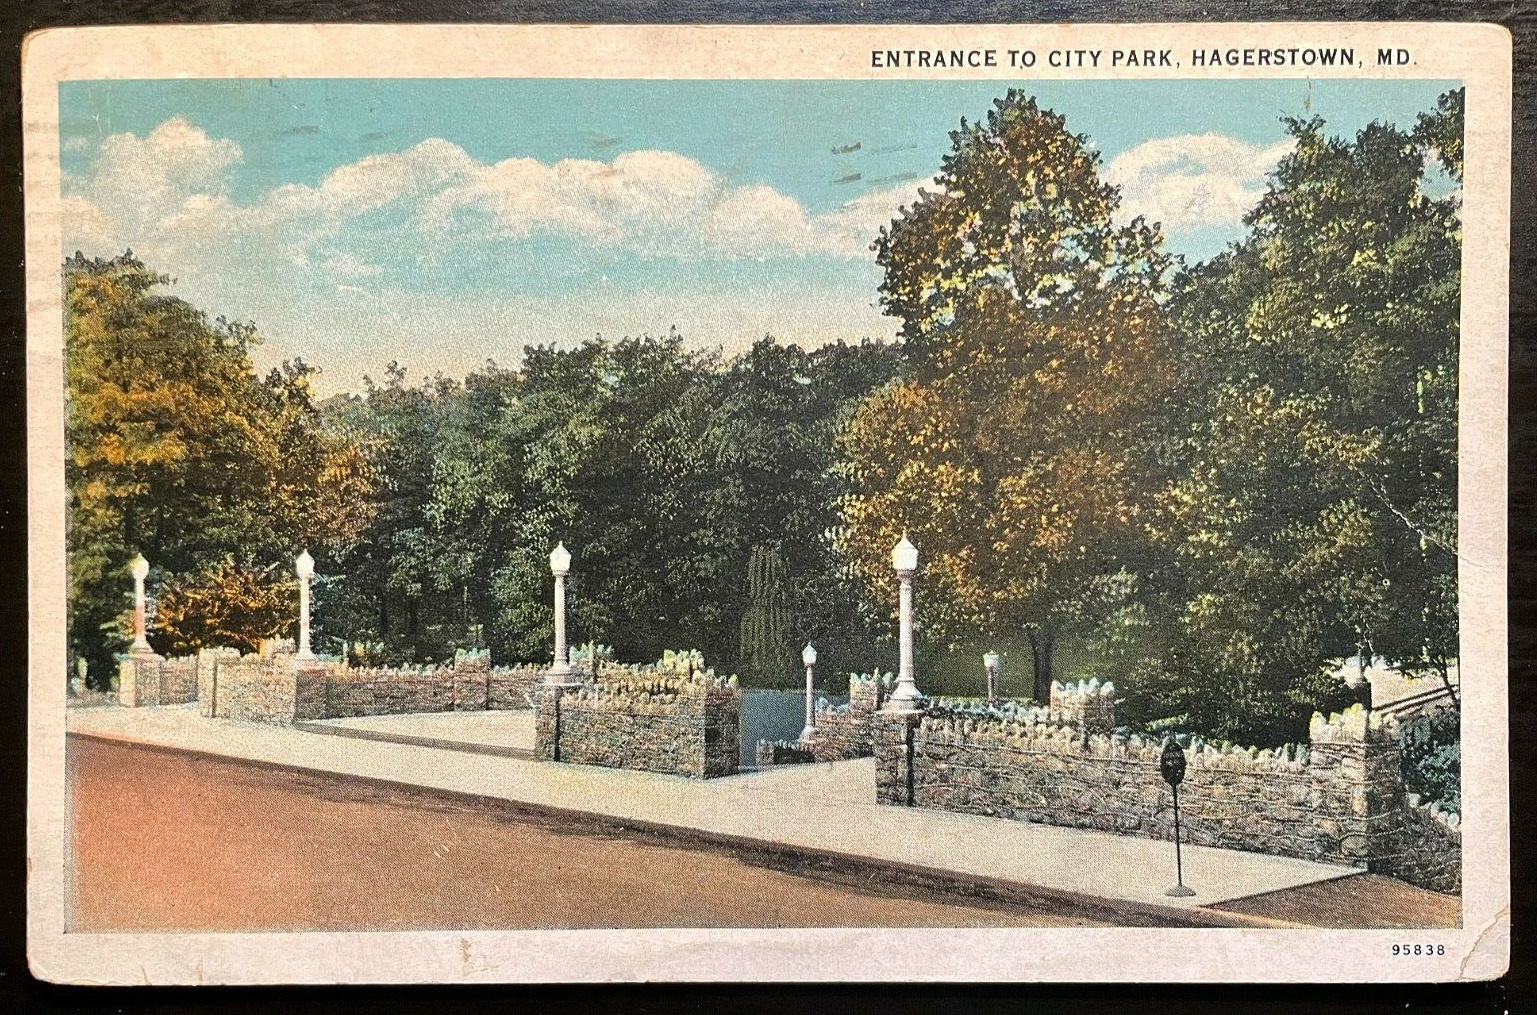 Vintage Postcard 1930 entrance to City Park, Hagerstown, Maryland